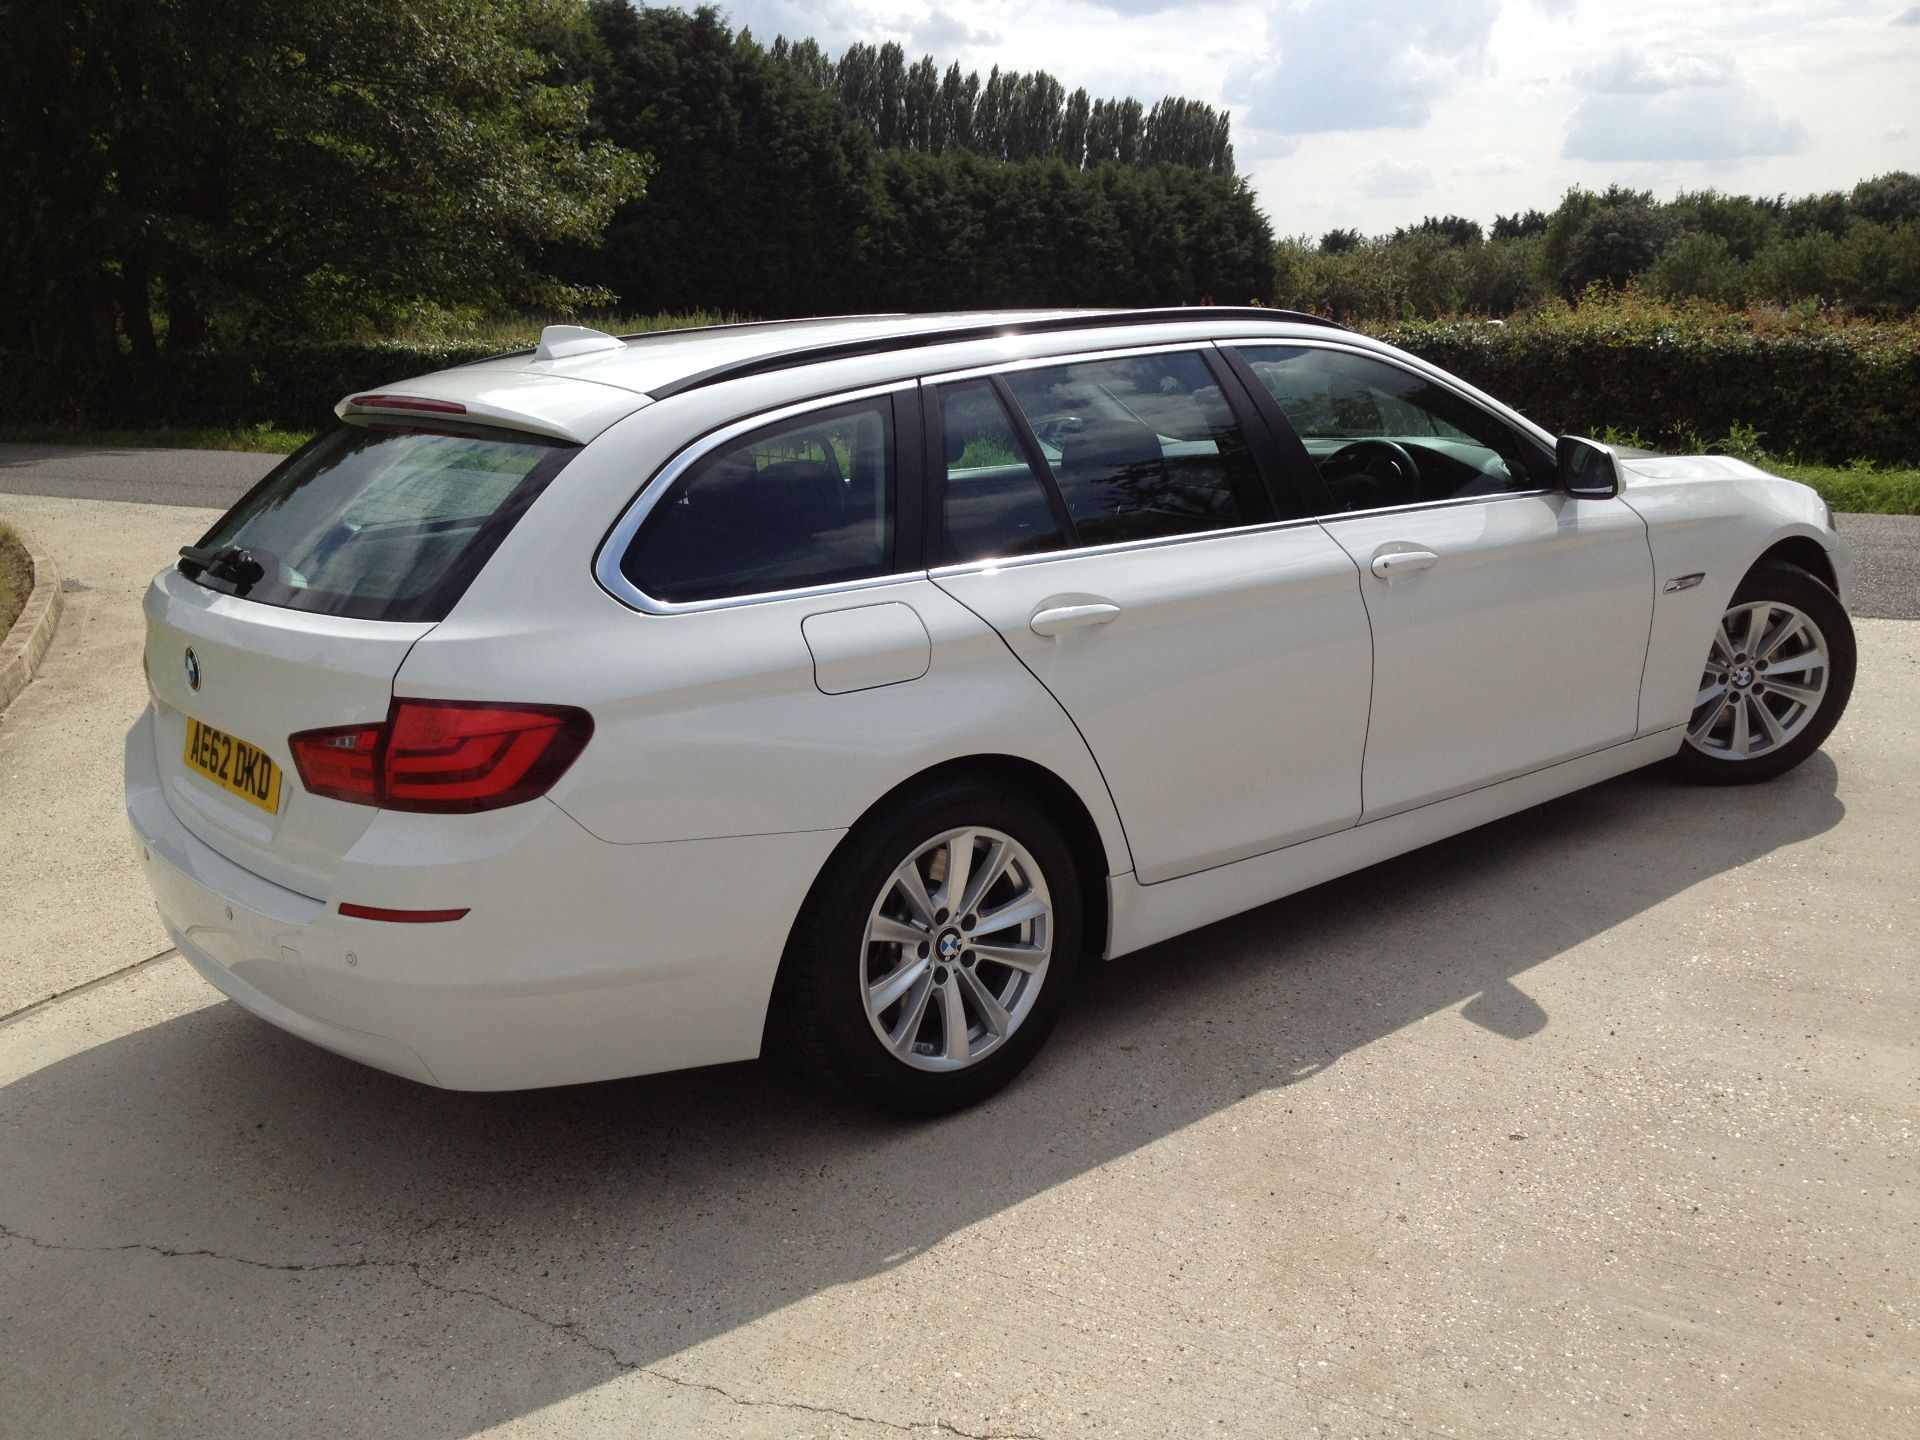 2012 bmw 530d diesel estate auto 52,000 miles 1 owner from new still under manufactures warranty - Image 5 of 9